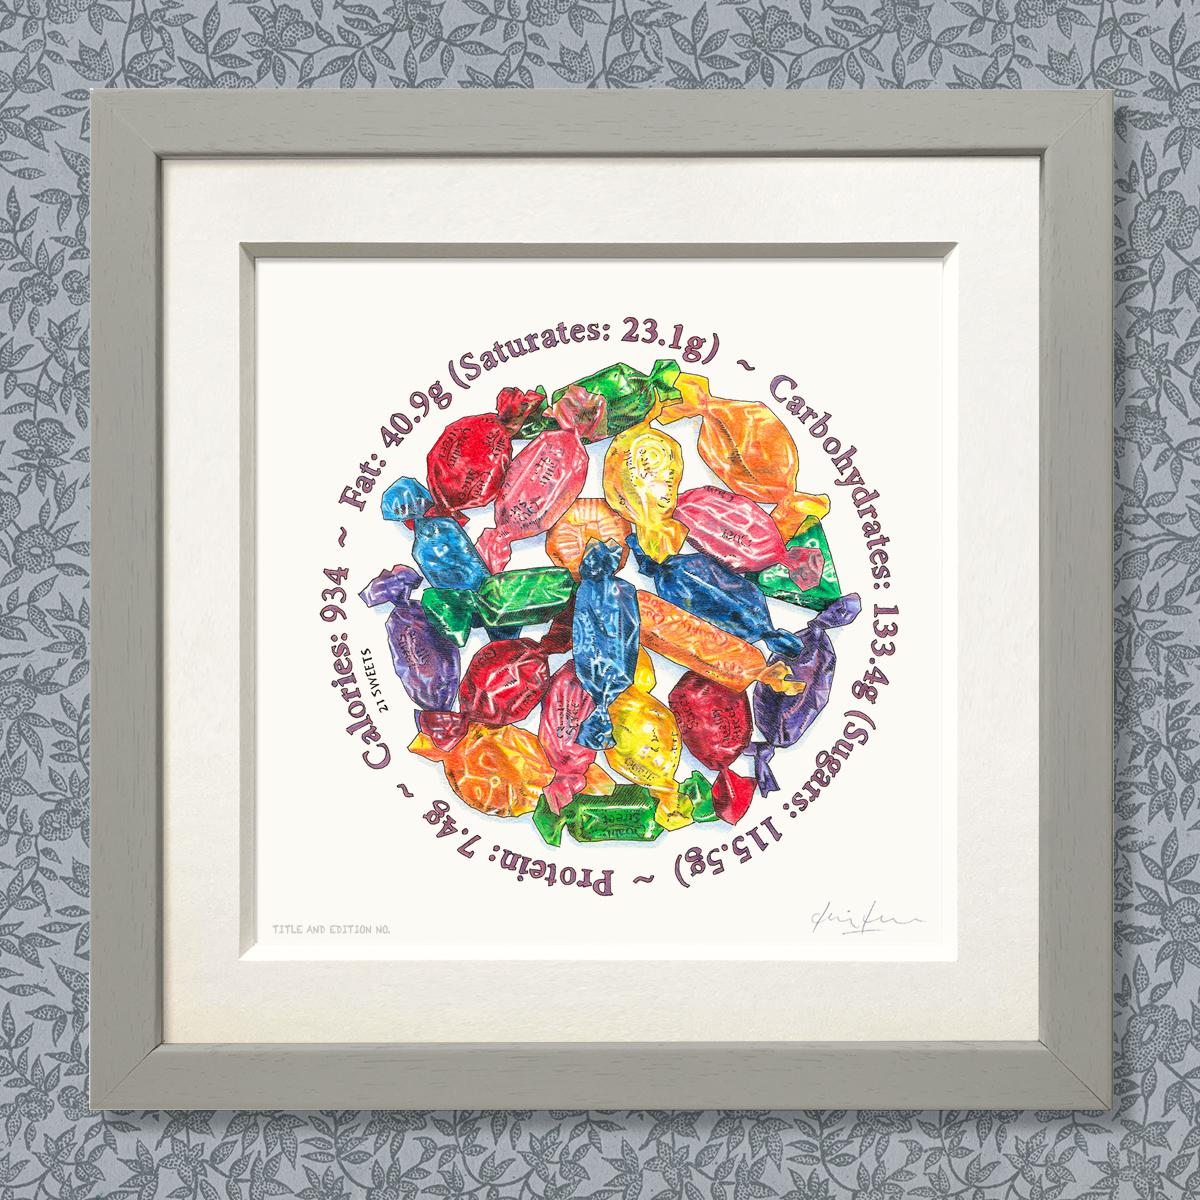 Limited edition print of coloured drawing of a pile of Quality Street chocolates, in a grey frame.